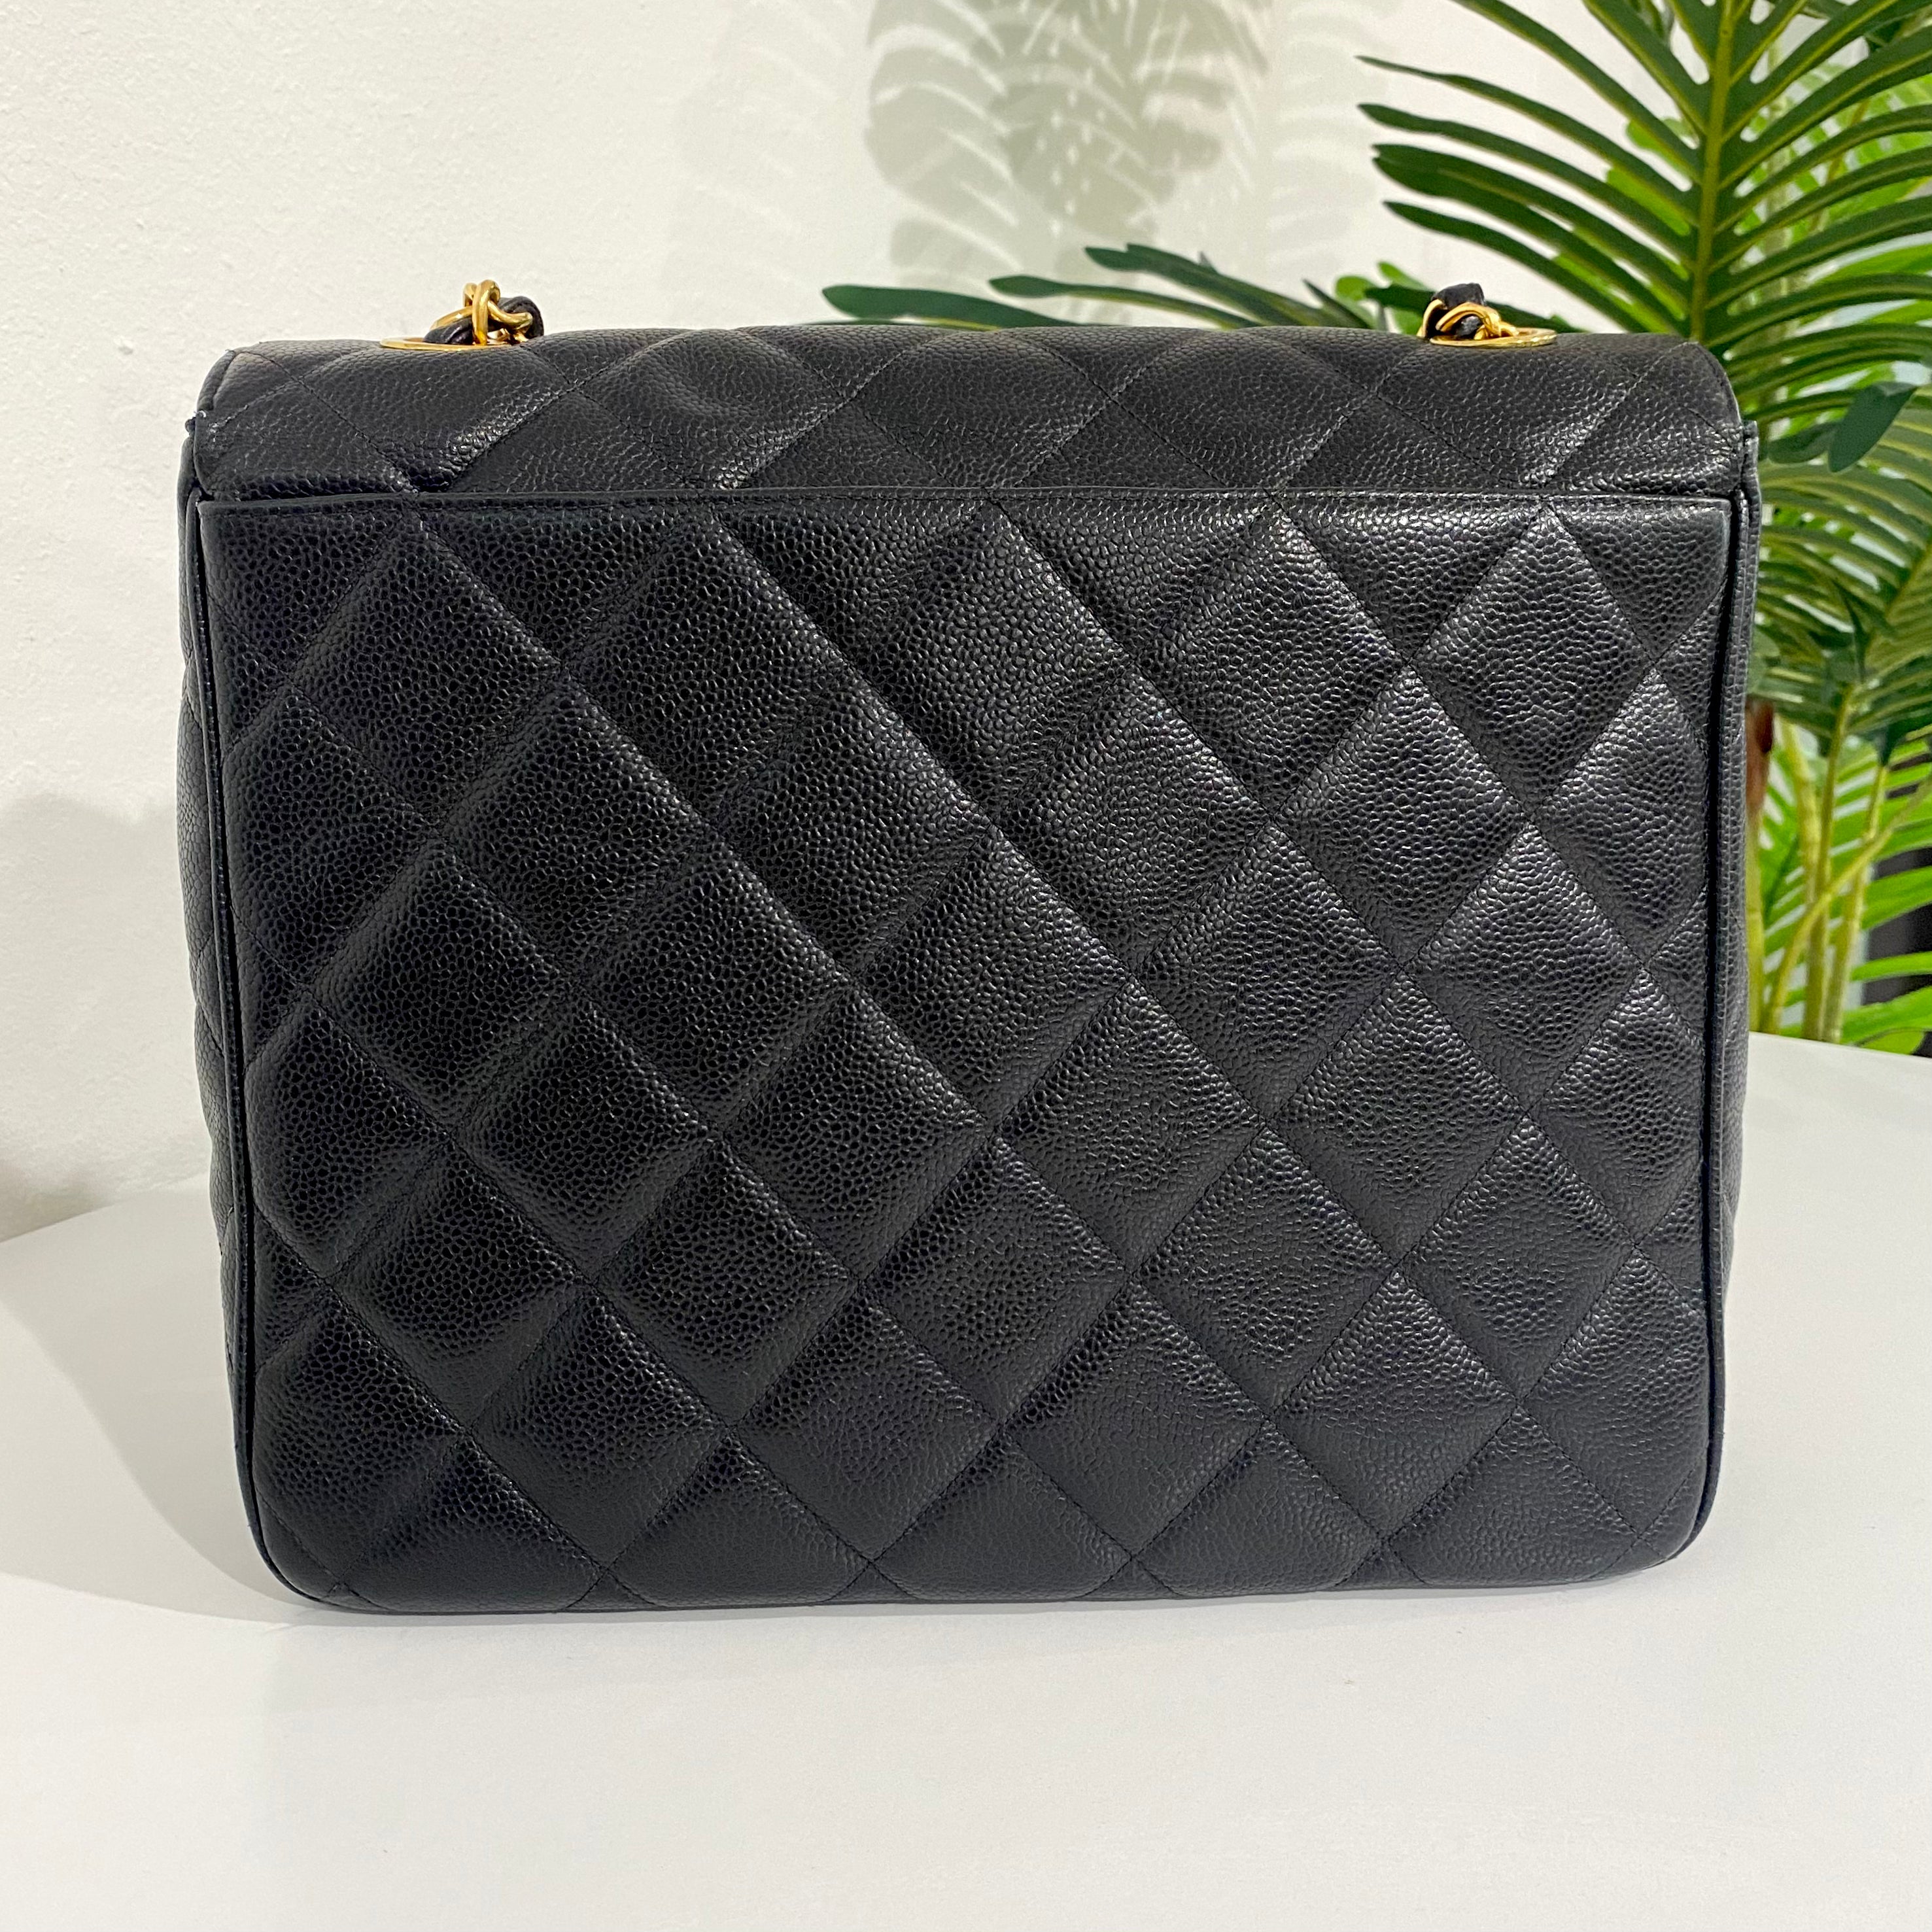 Shop authentic Chanel Classic Maxi Double Flap Bag at revogue for just USD  4,250.00